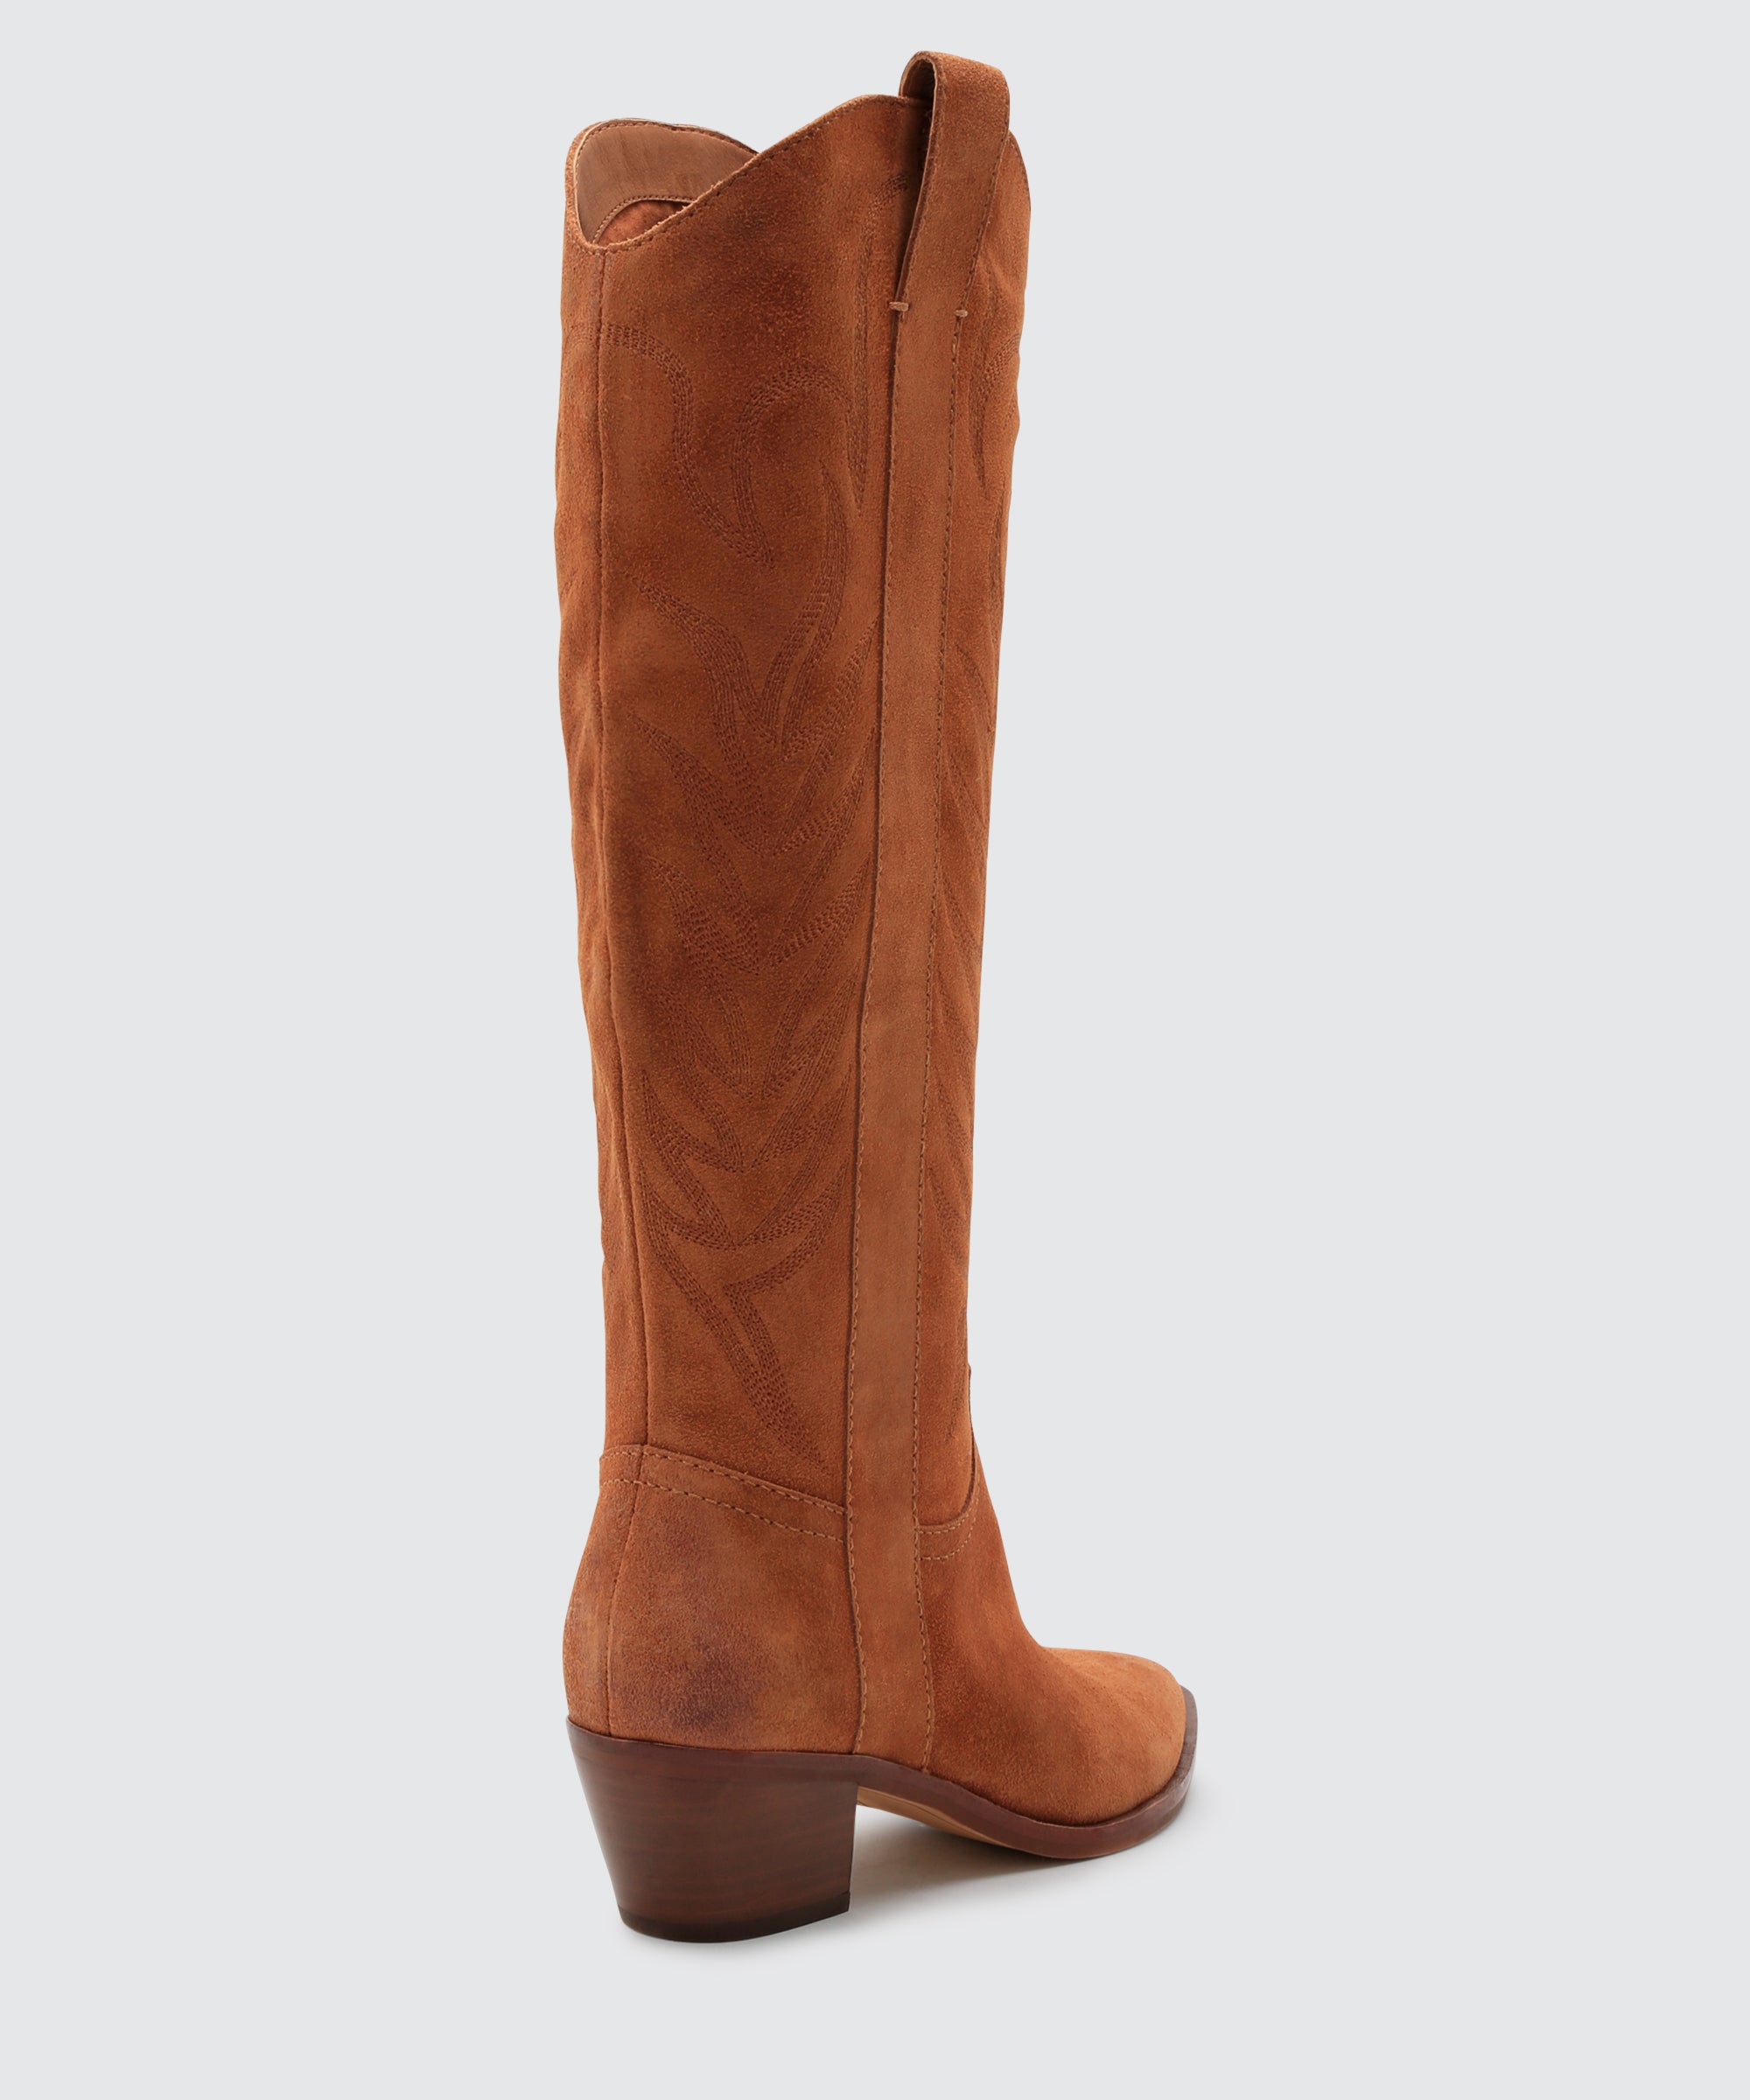 dolce vita riding boots